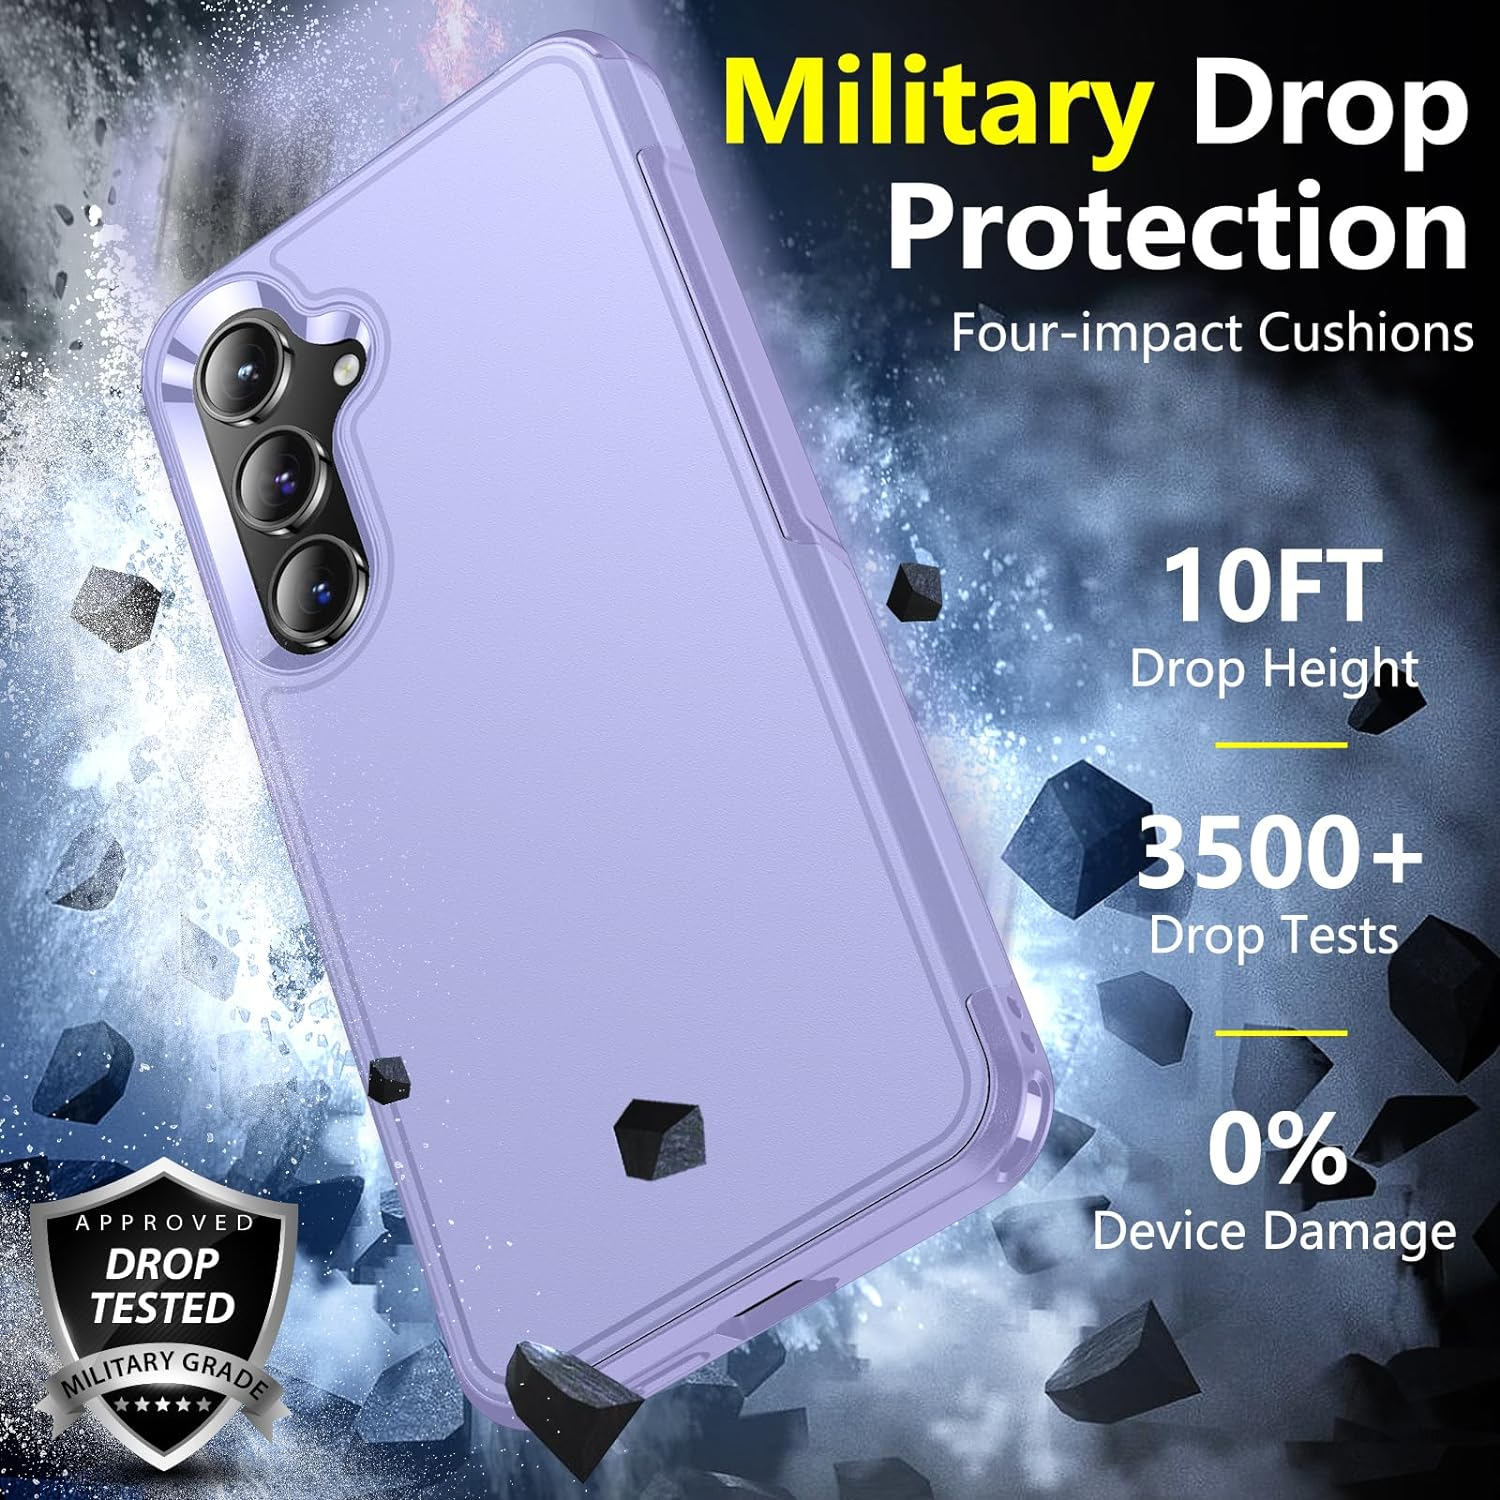 HSP Case for Samsung Galaxy S23 5G, Dust-Proof Mobile Phone Case, Premium  TPU Silicone Case, Scratch Resistant Shockproof Drop Protector, Camera